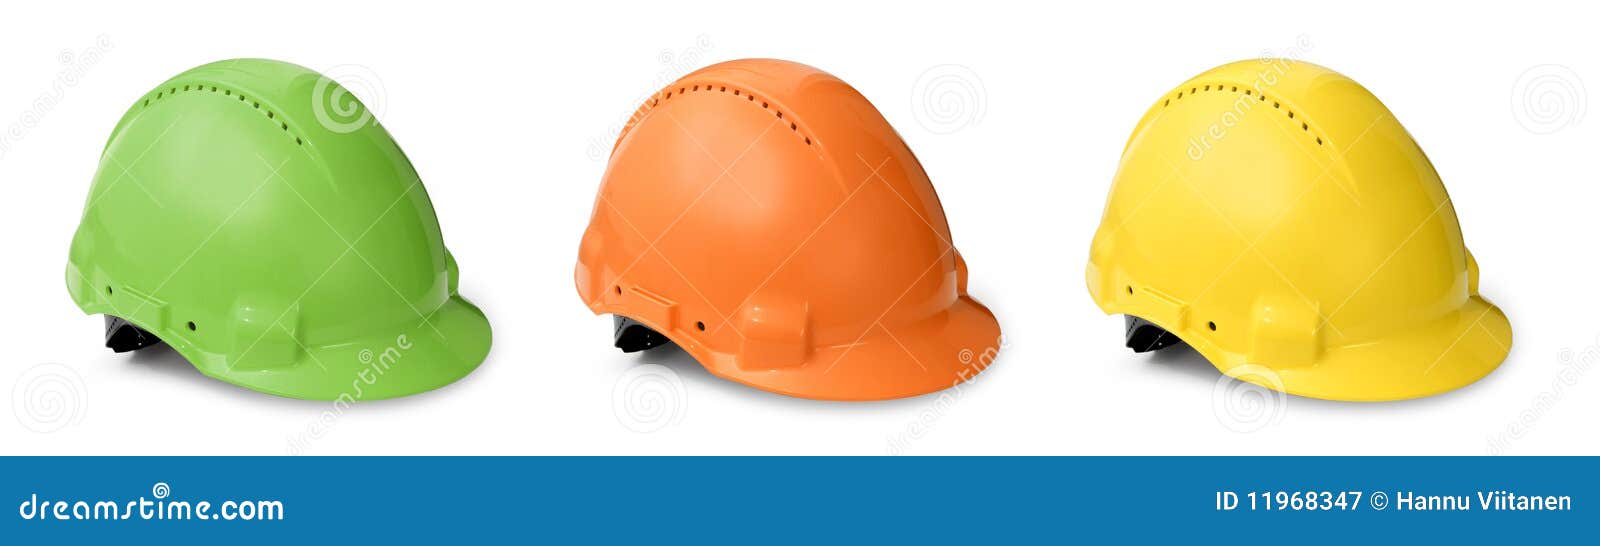 hard hat color collection